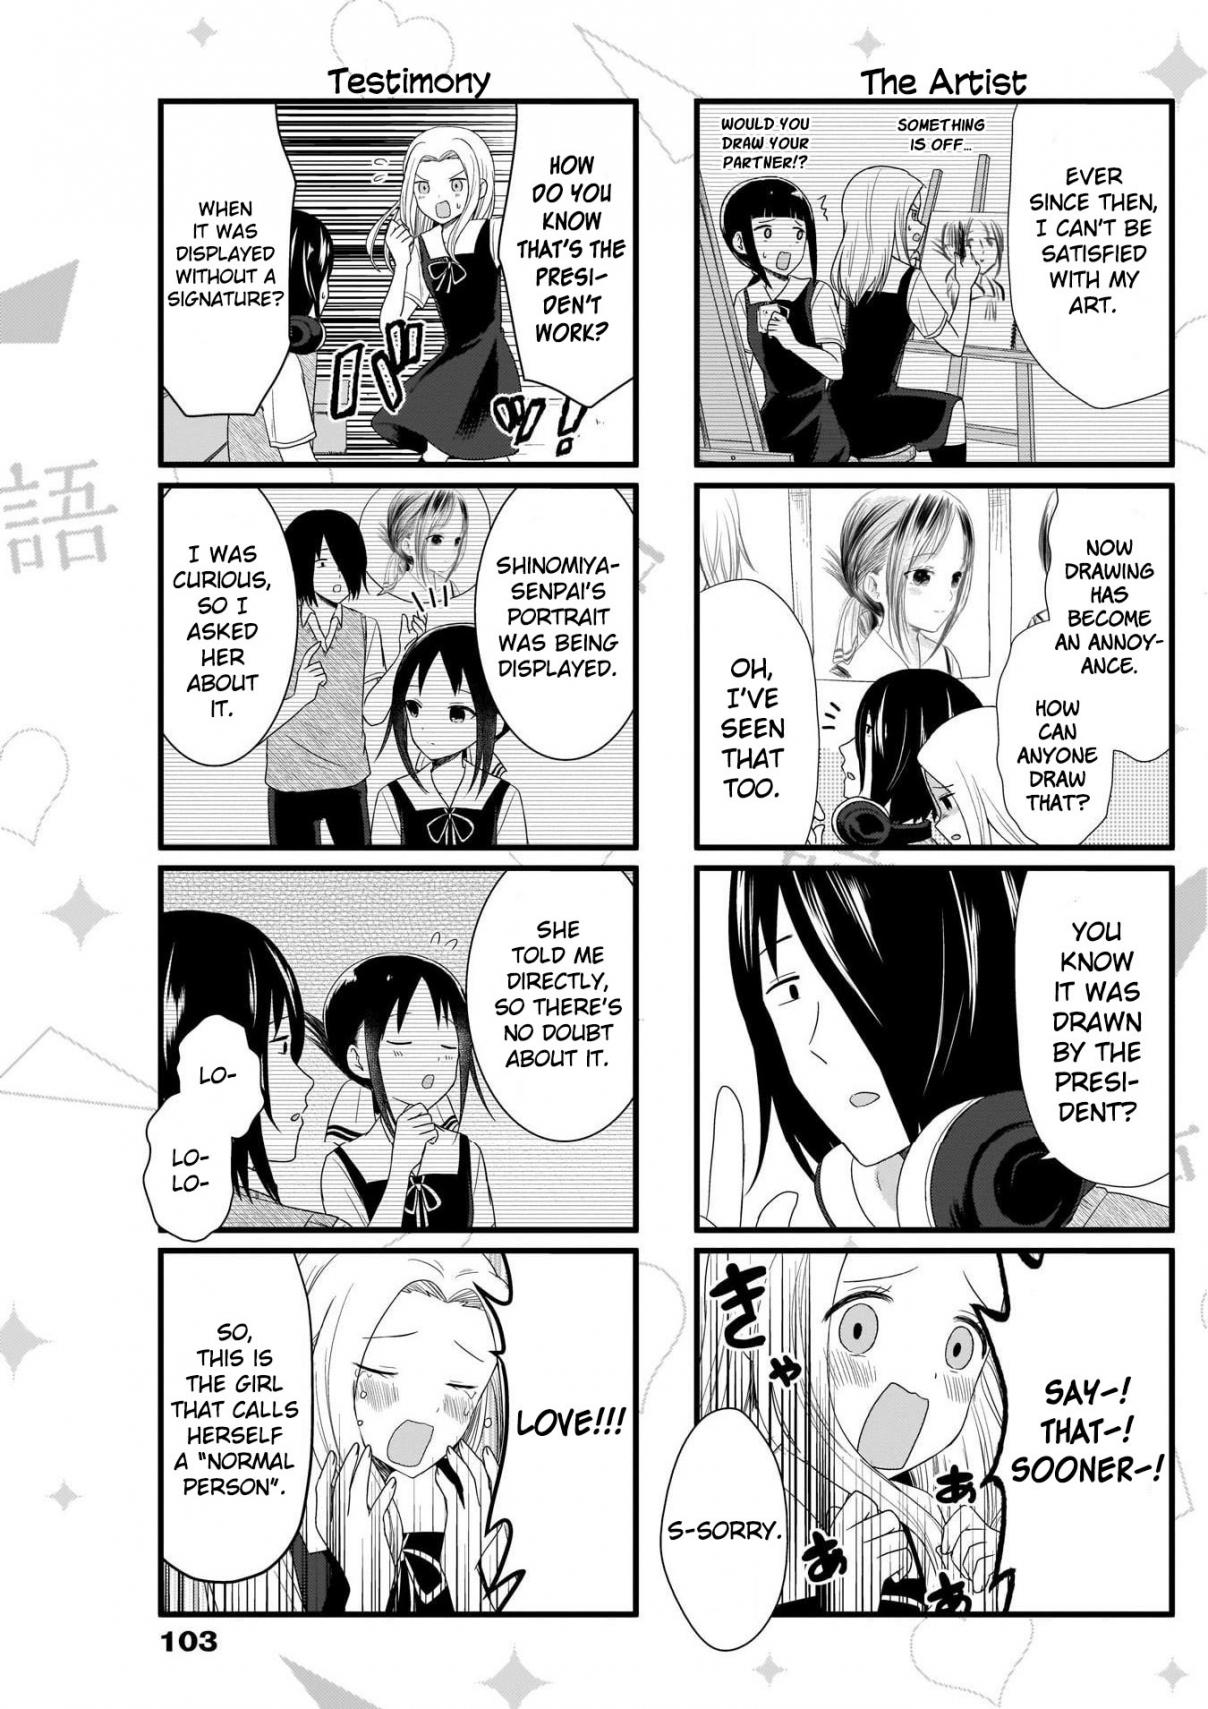 We Want To Talk About Kaguya Ch. 55 We Want to Talk About the Portrait From the Gods